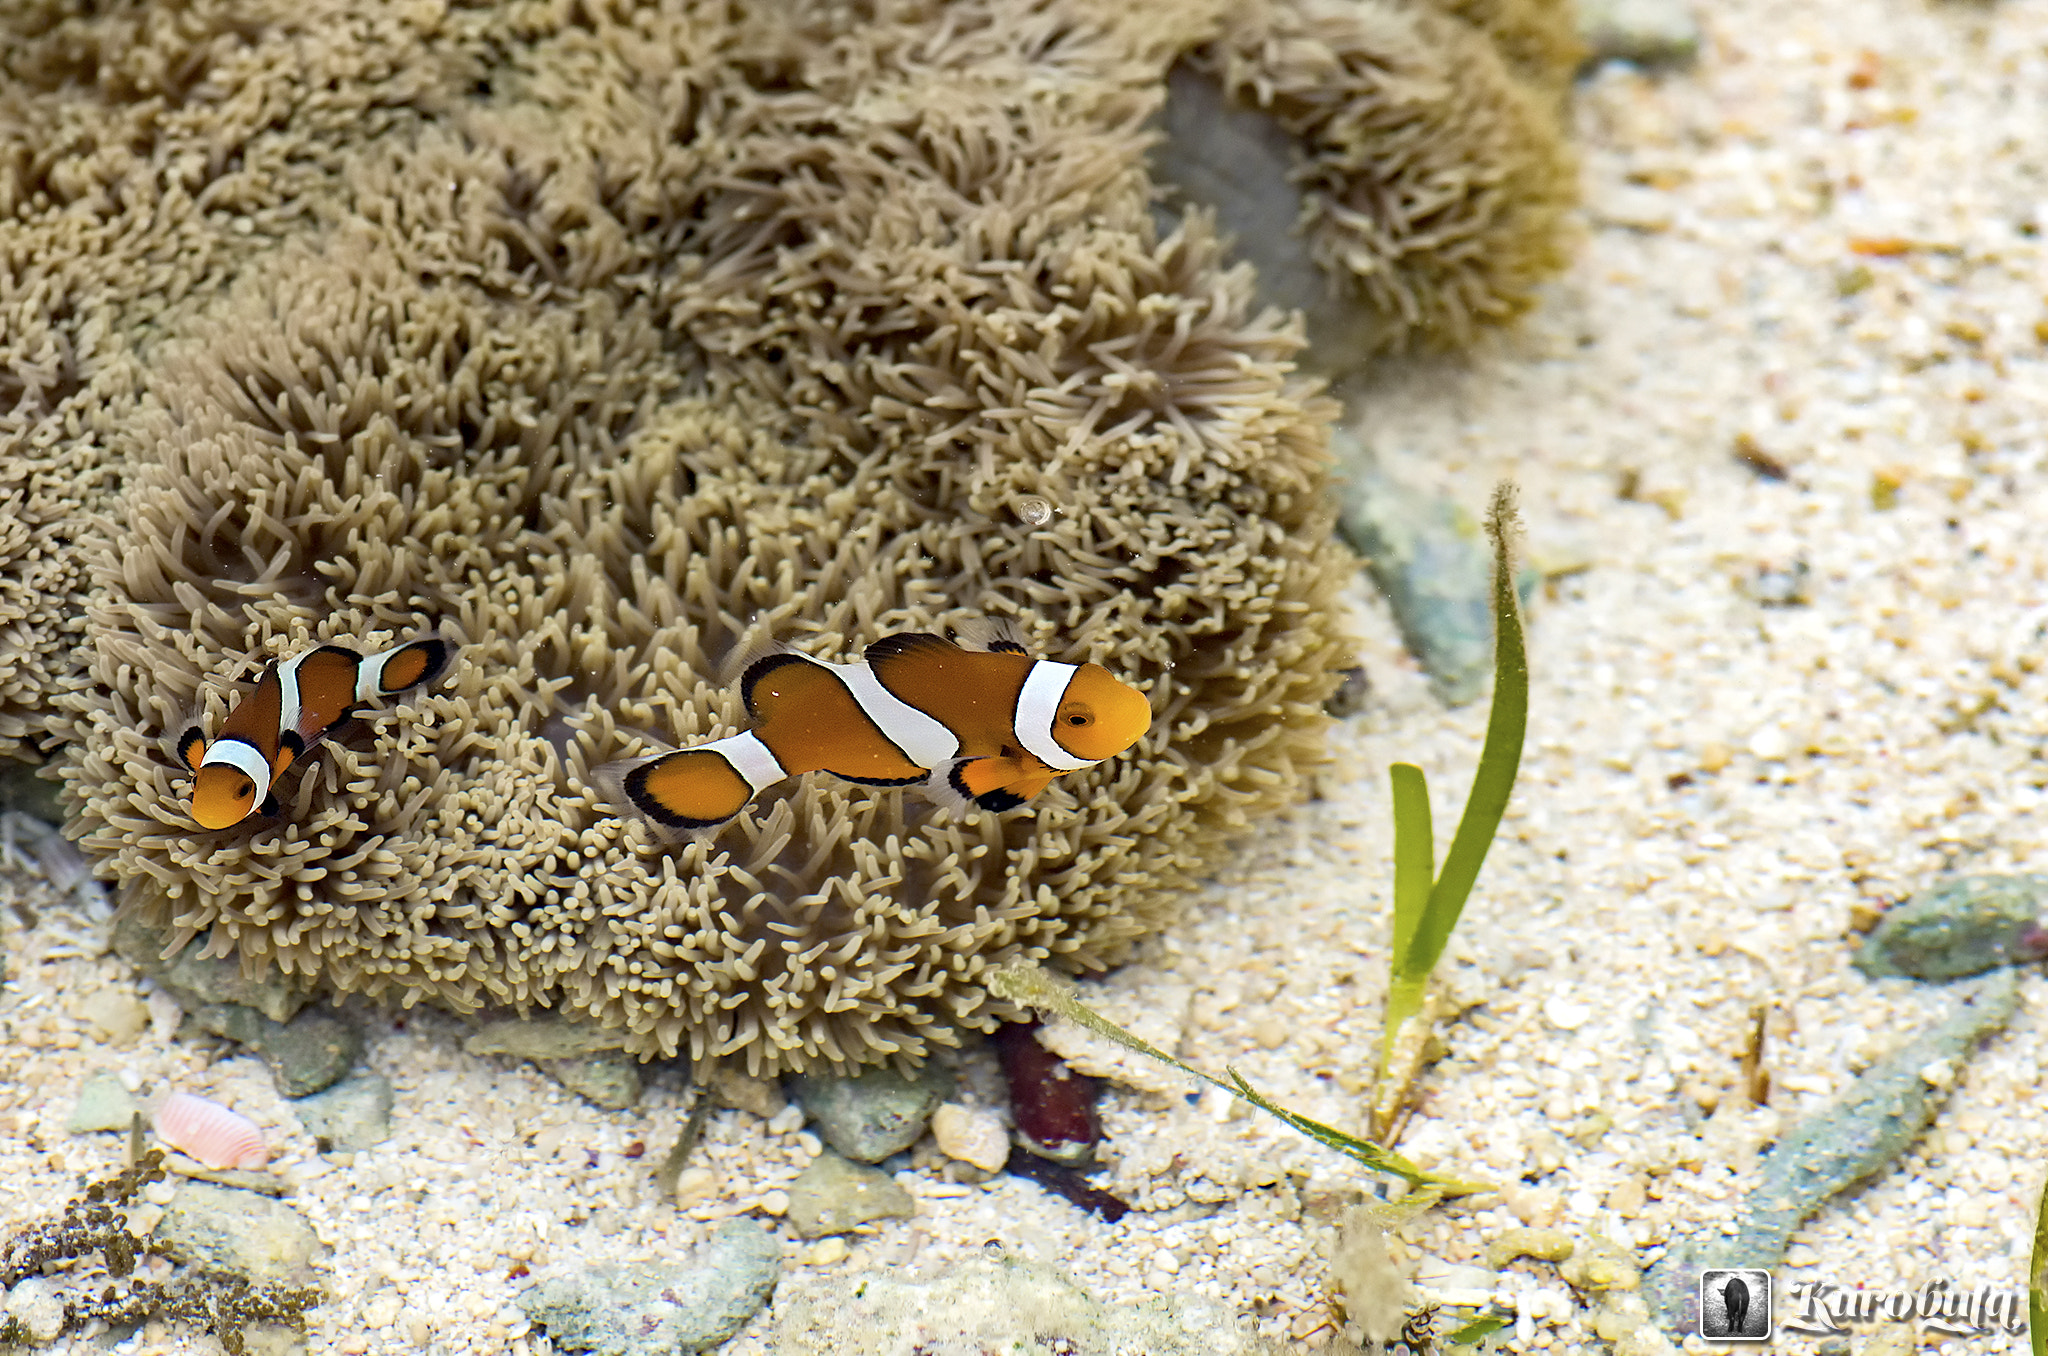 Pentax K-5 II sample photo. It was angry anemone fish photography